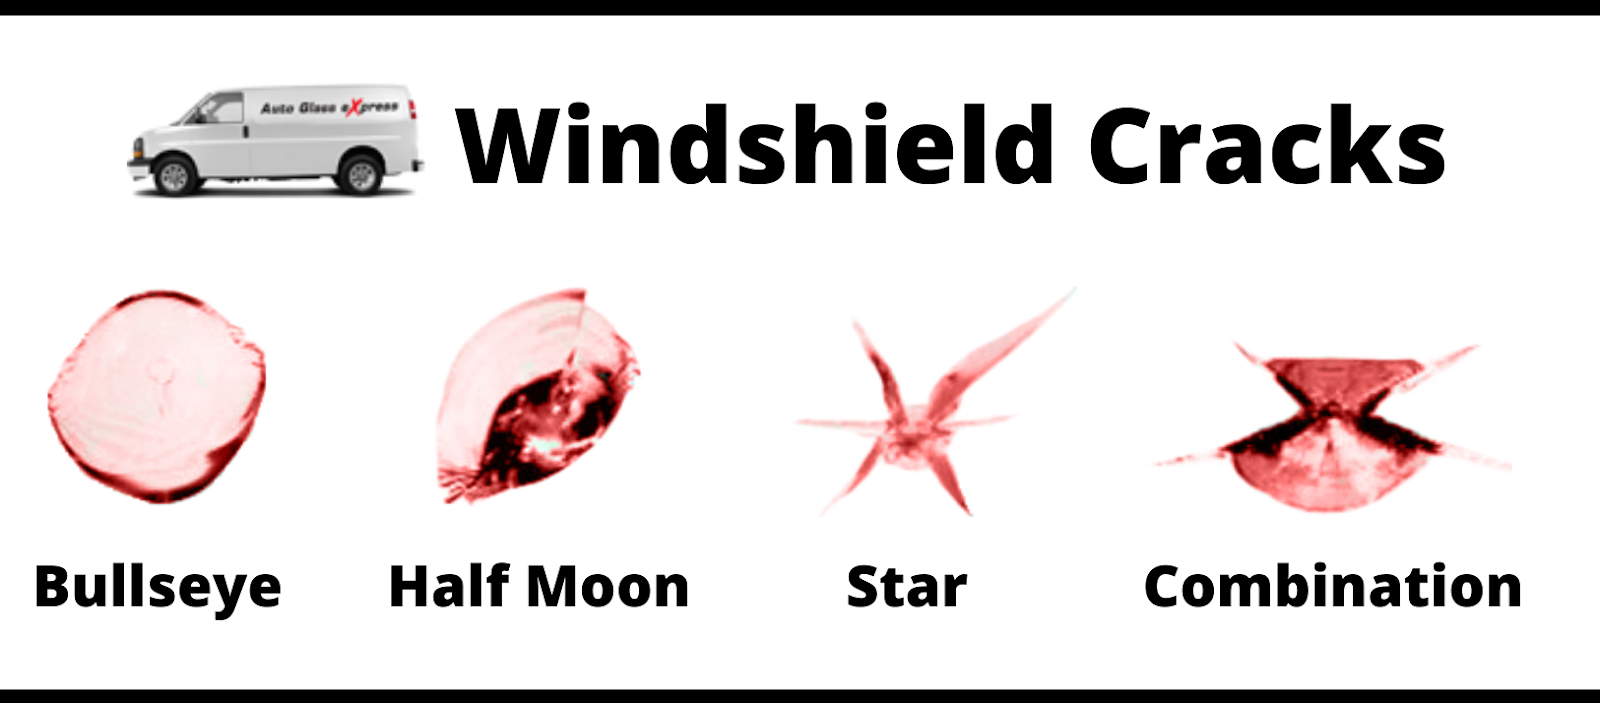 An informational graphic titled "Windshield Cracks" showing different types of windshield damage. At the top left, there is an image of a white van with the Auto Glass eXpress logo.